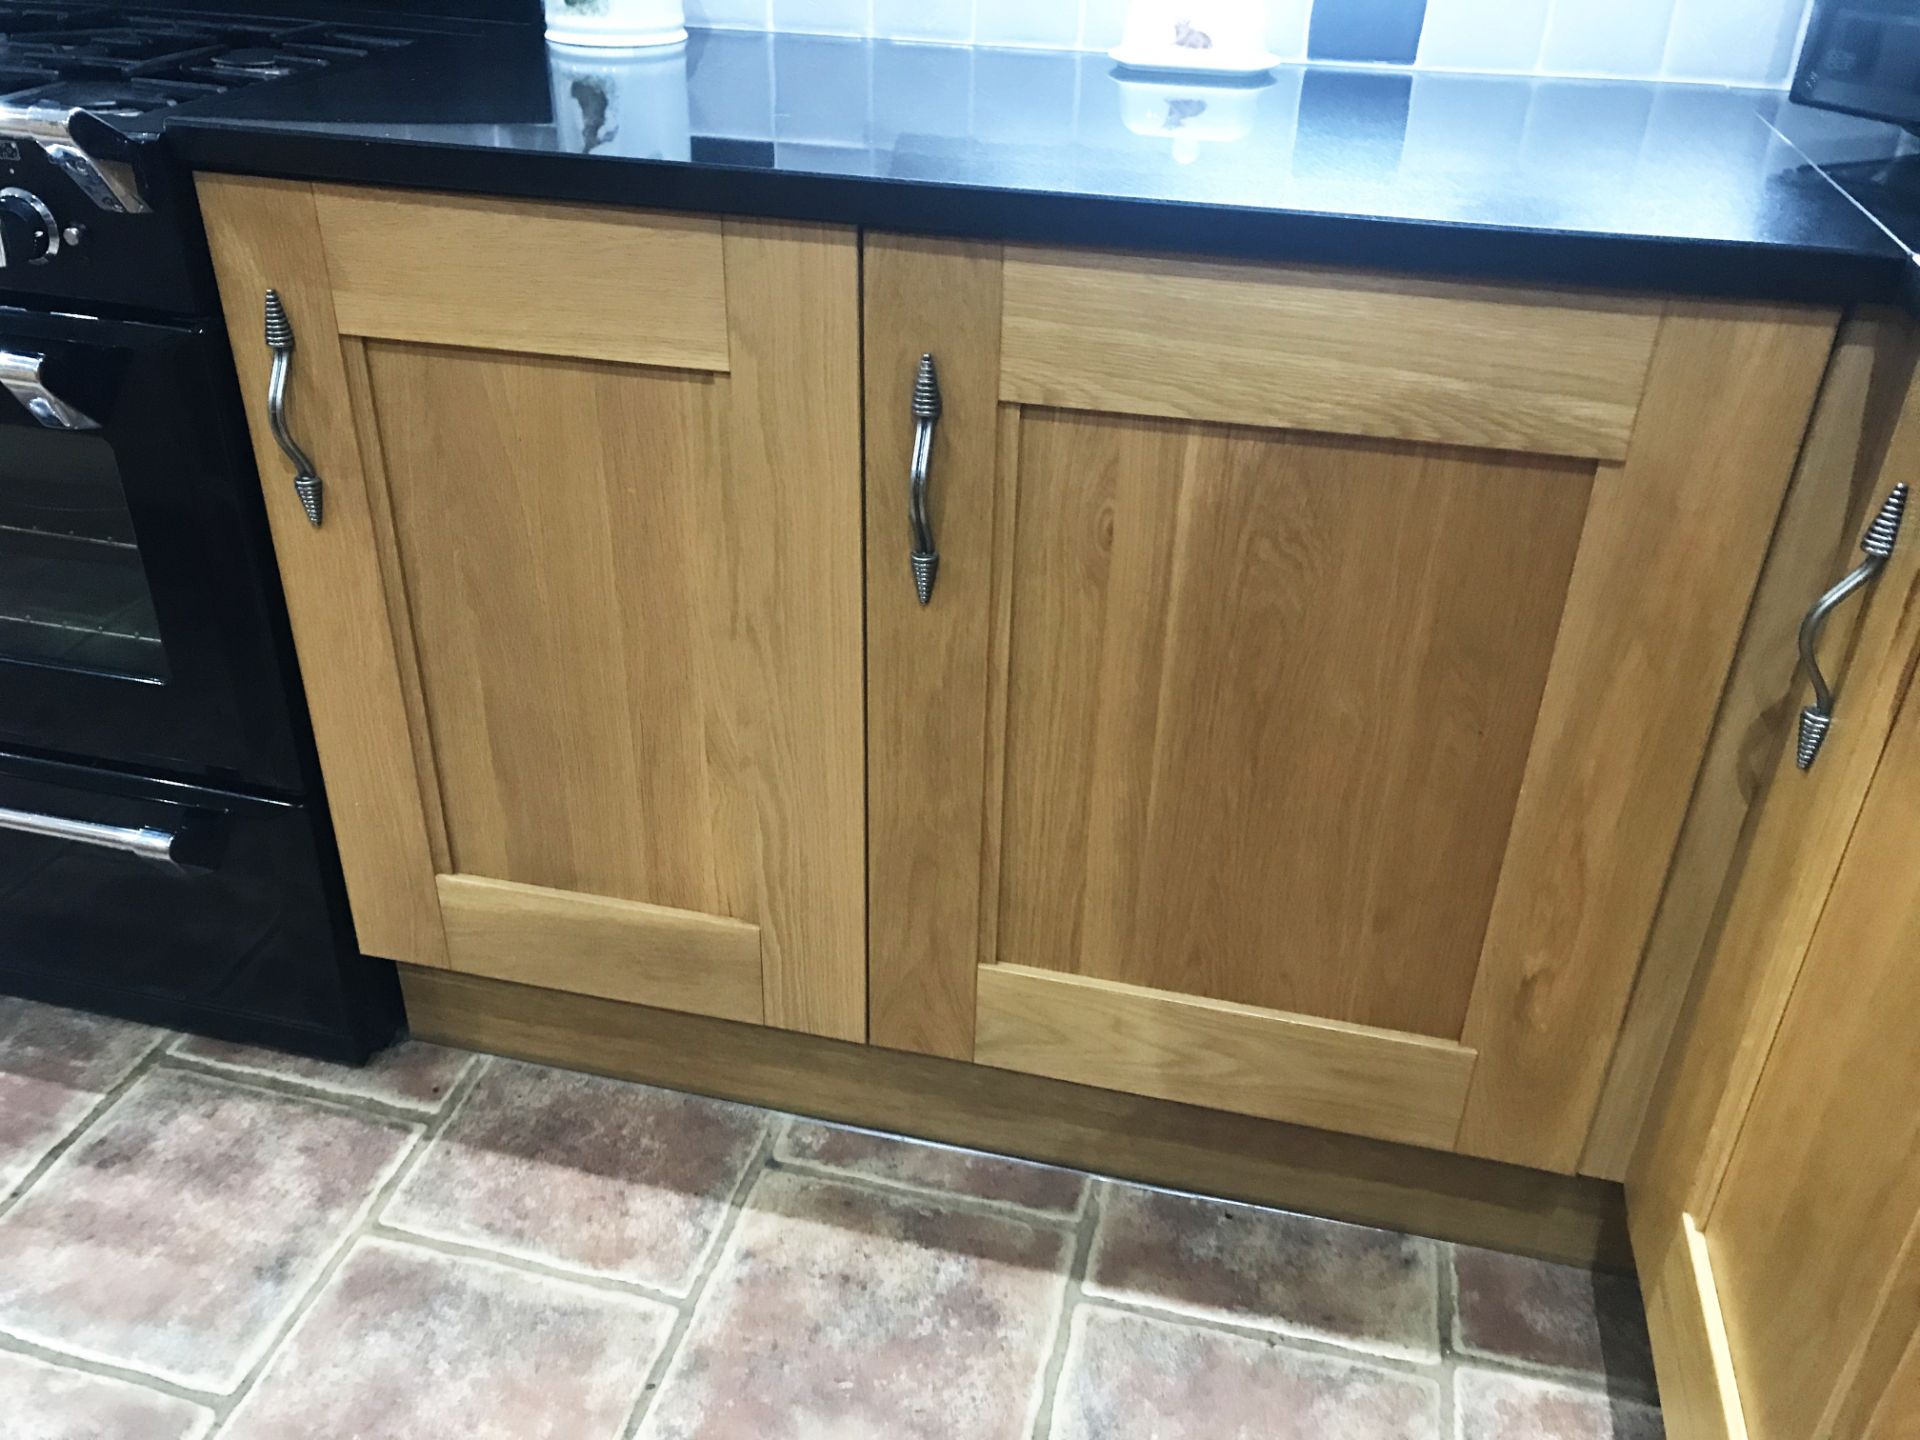 1 x Farmhouse Shaker Style Fitted Kitchen Featuring Solid Oak Soft Close Doors, Central Island, - Image 43 of 60